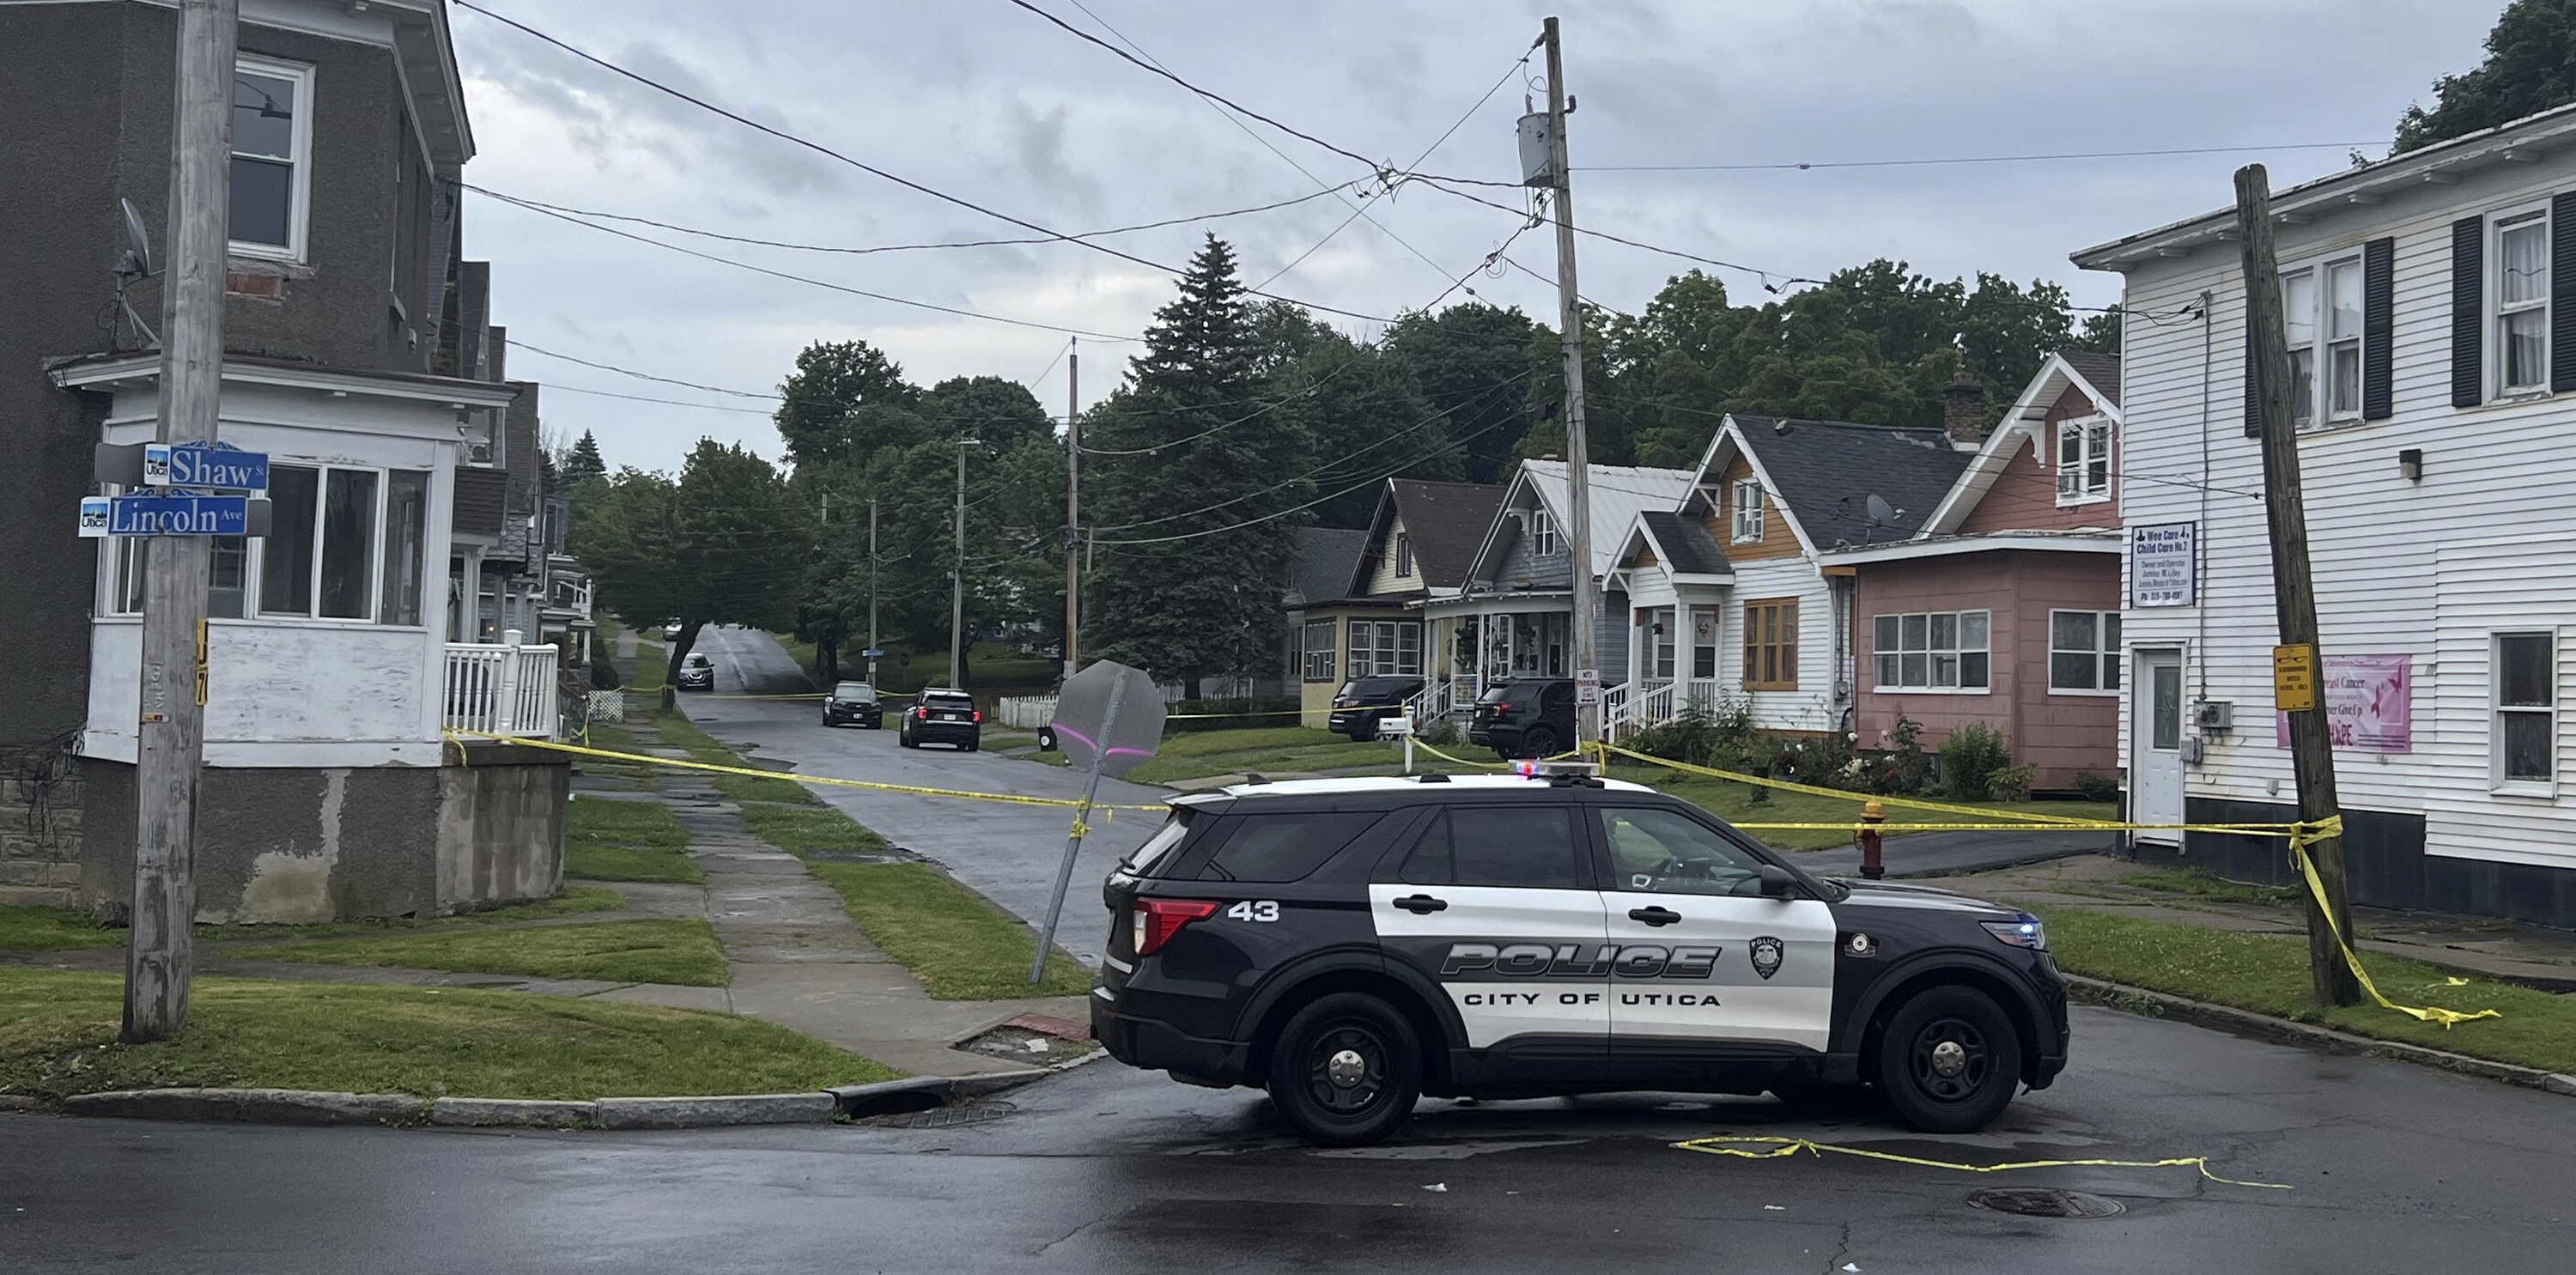 Police investigate the scene of Friday nights shooting in Utica, N.Y., early Saturday, June 29, 2024. An officer shot and killed a teen fleeing while pointing a replica gun, police said Saturday. (Kenny Lacy Jr./Syracuse.com via AP)